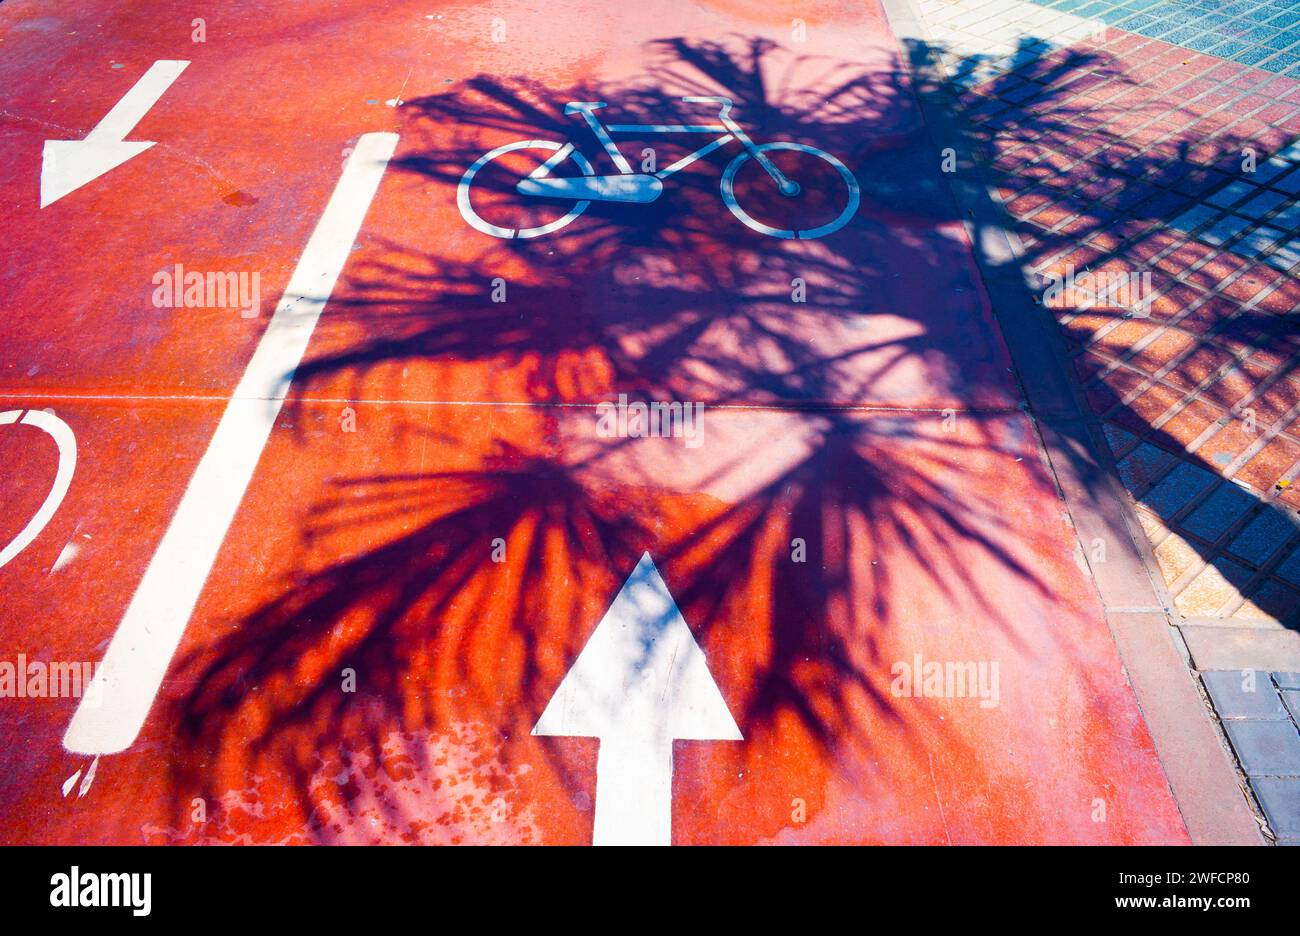 Cycle track in sun light with shadow of palm tree Stock Photo